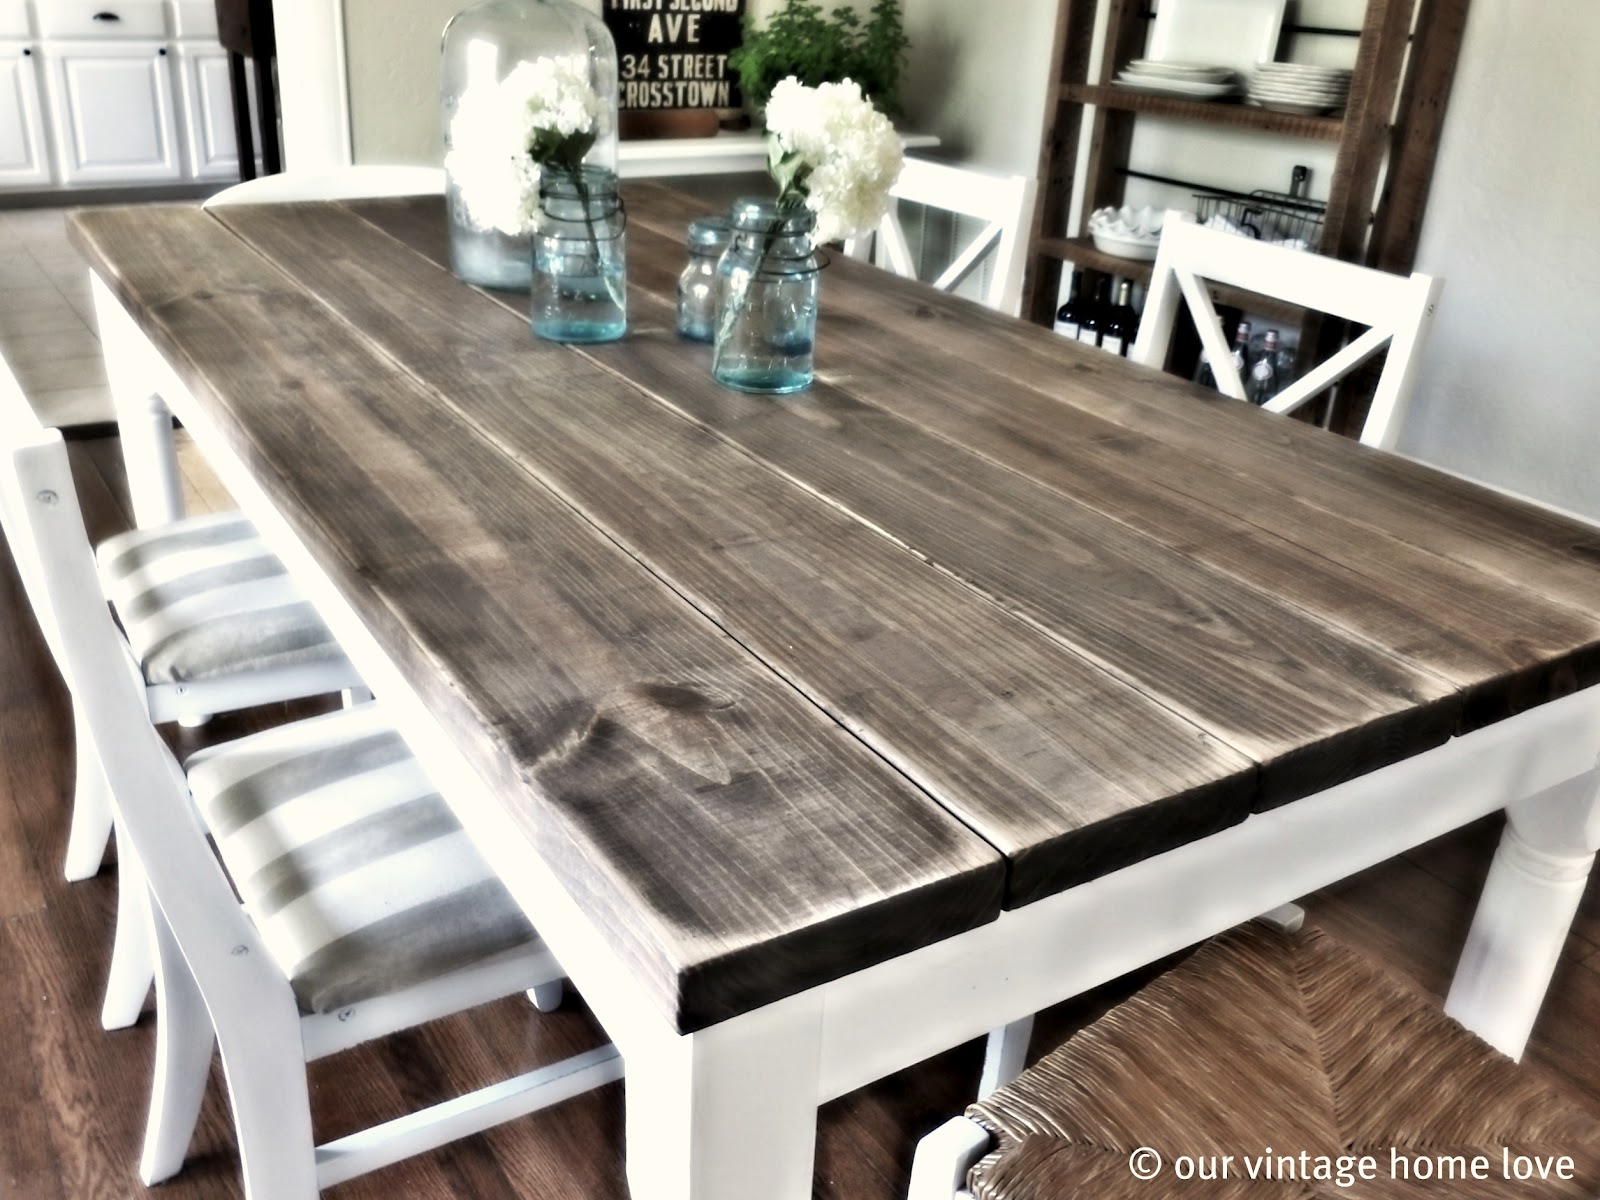 Rustic Dining Room Table Designs